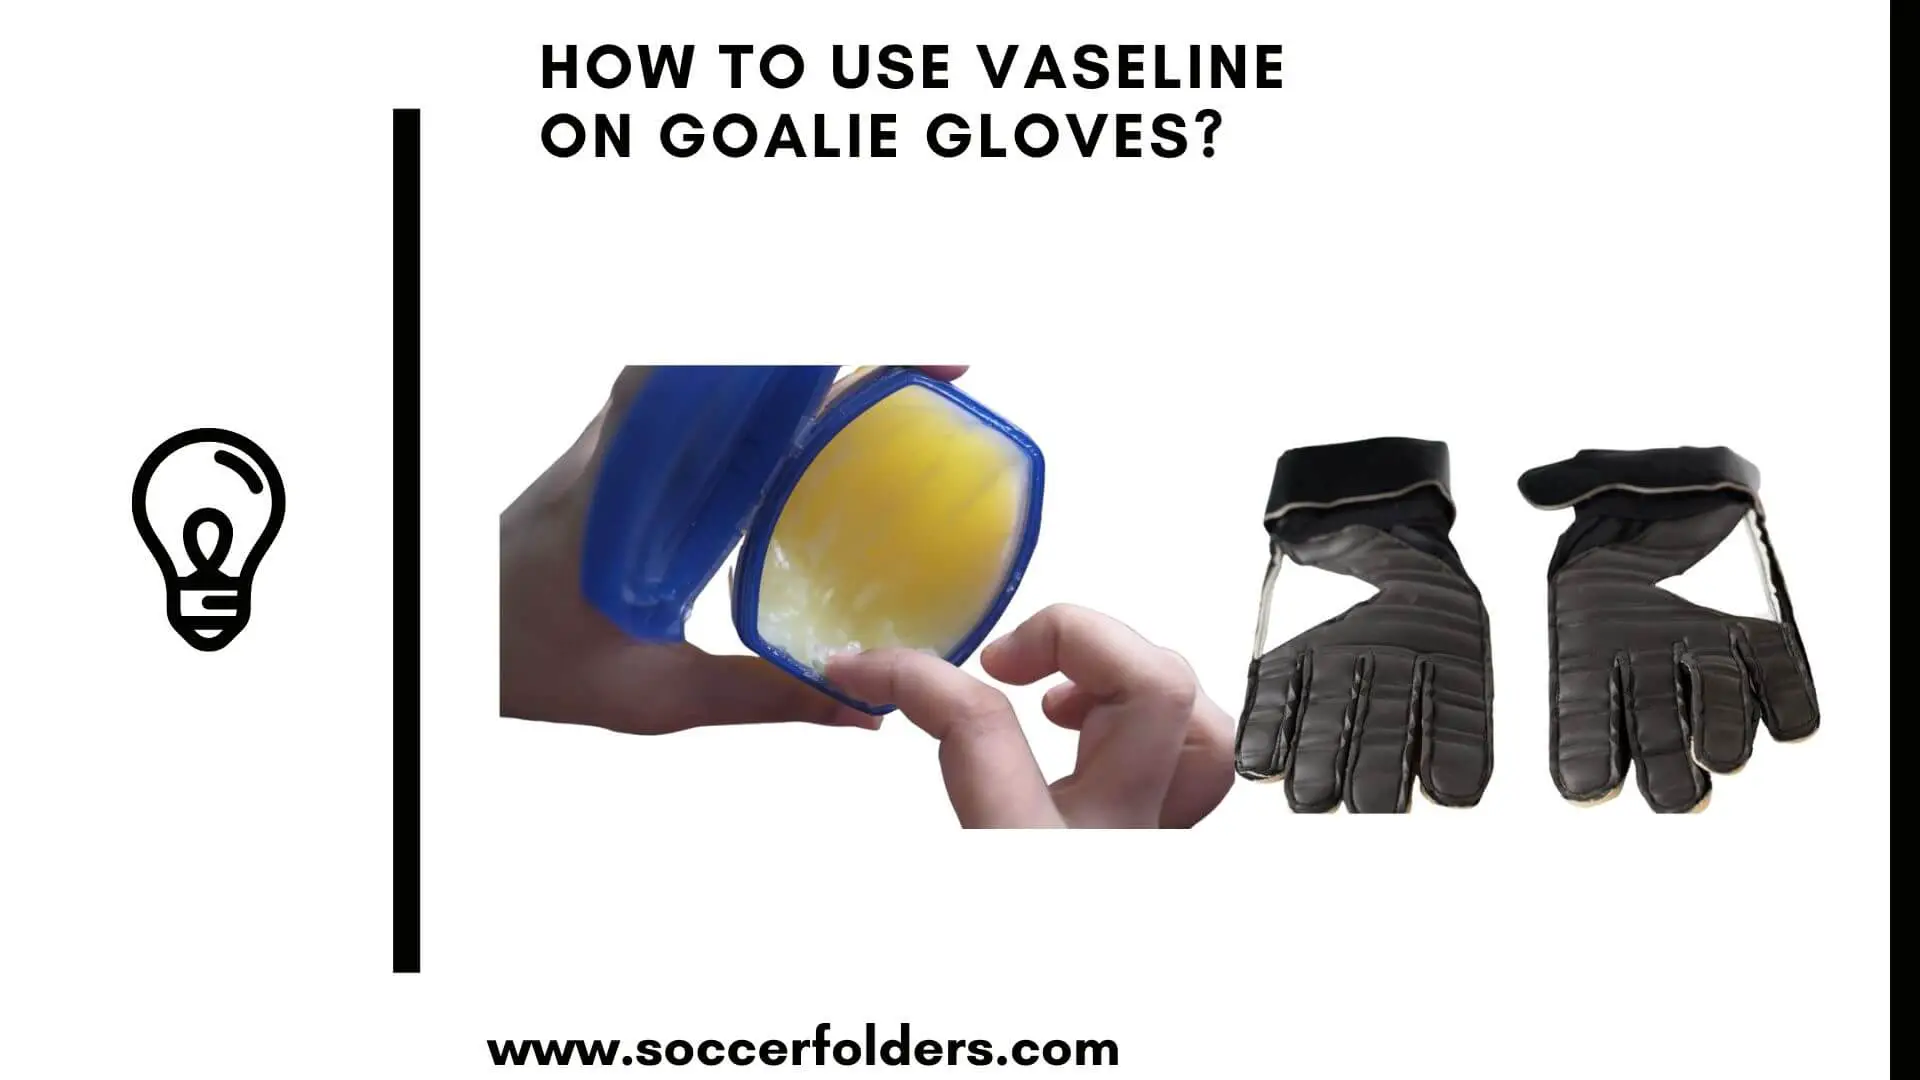 How to use Vaseline on goalie gloves - Featured Image